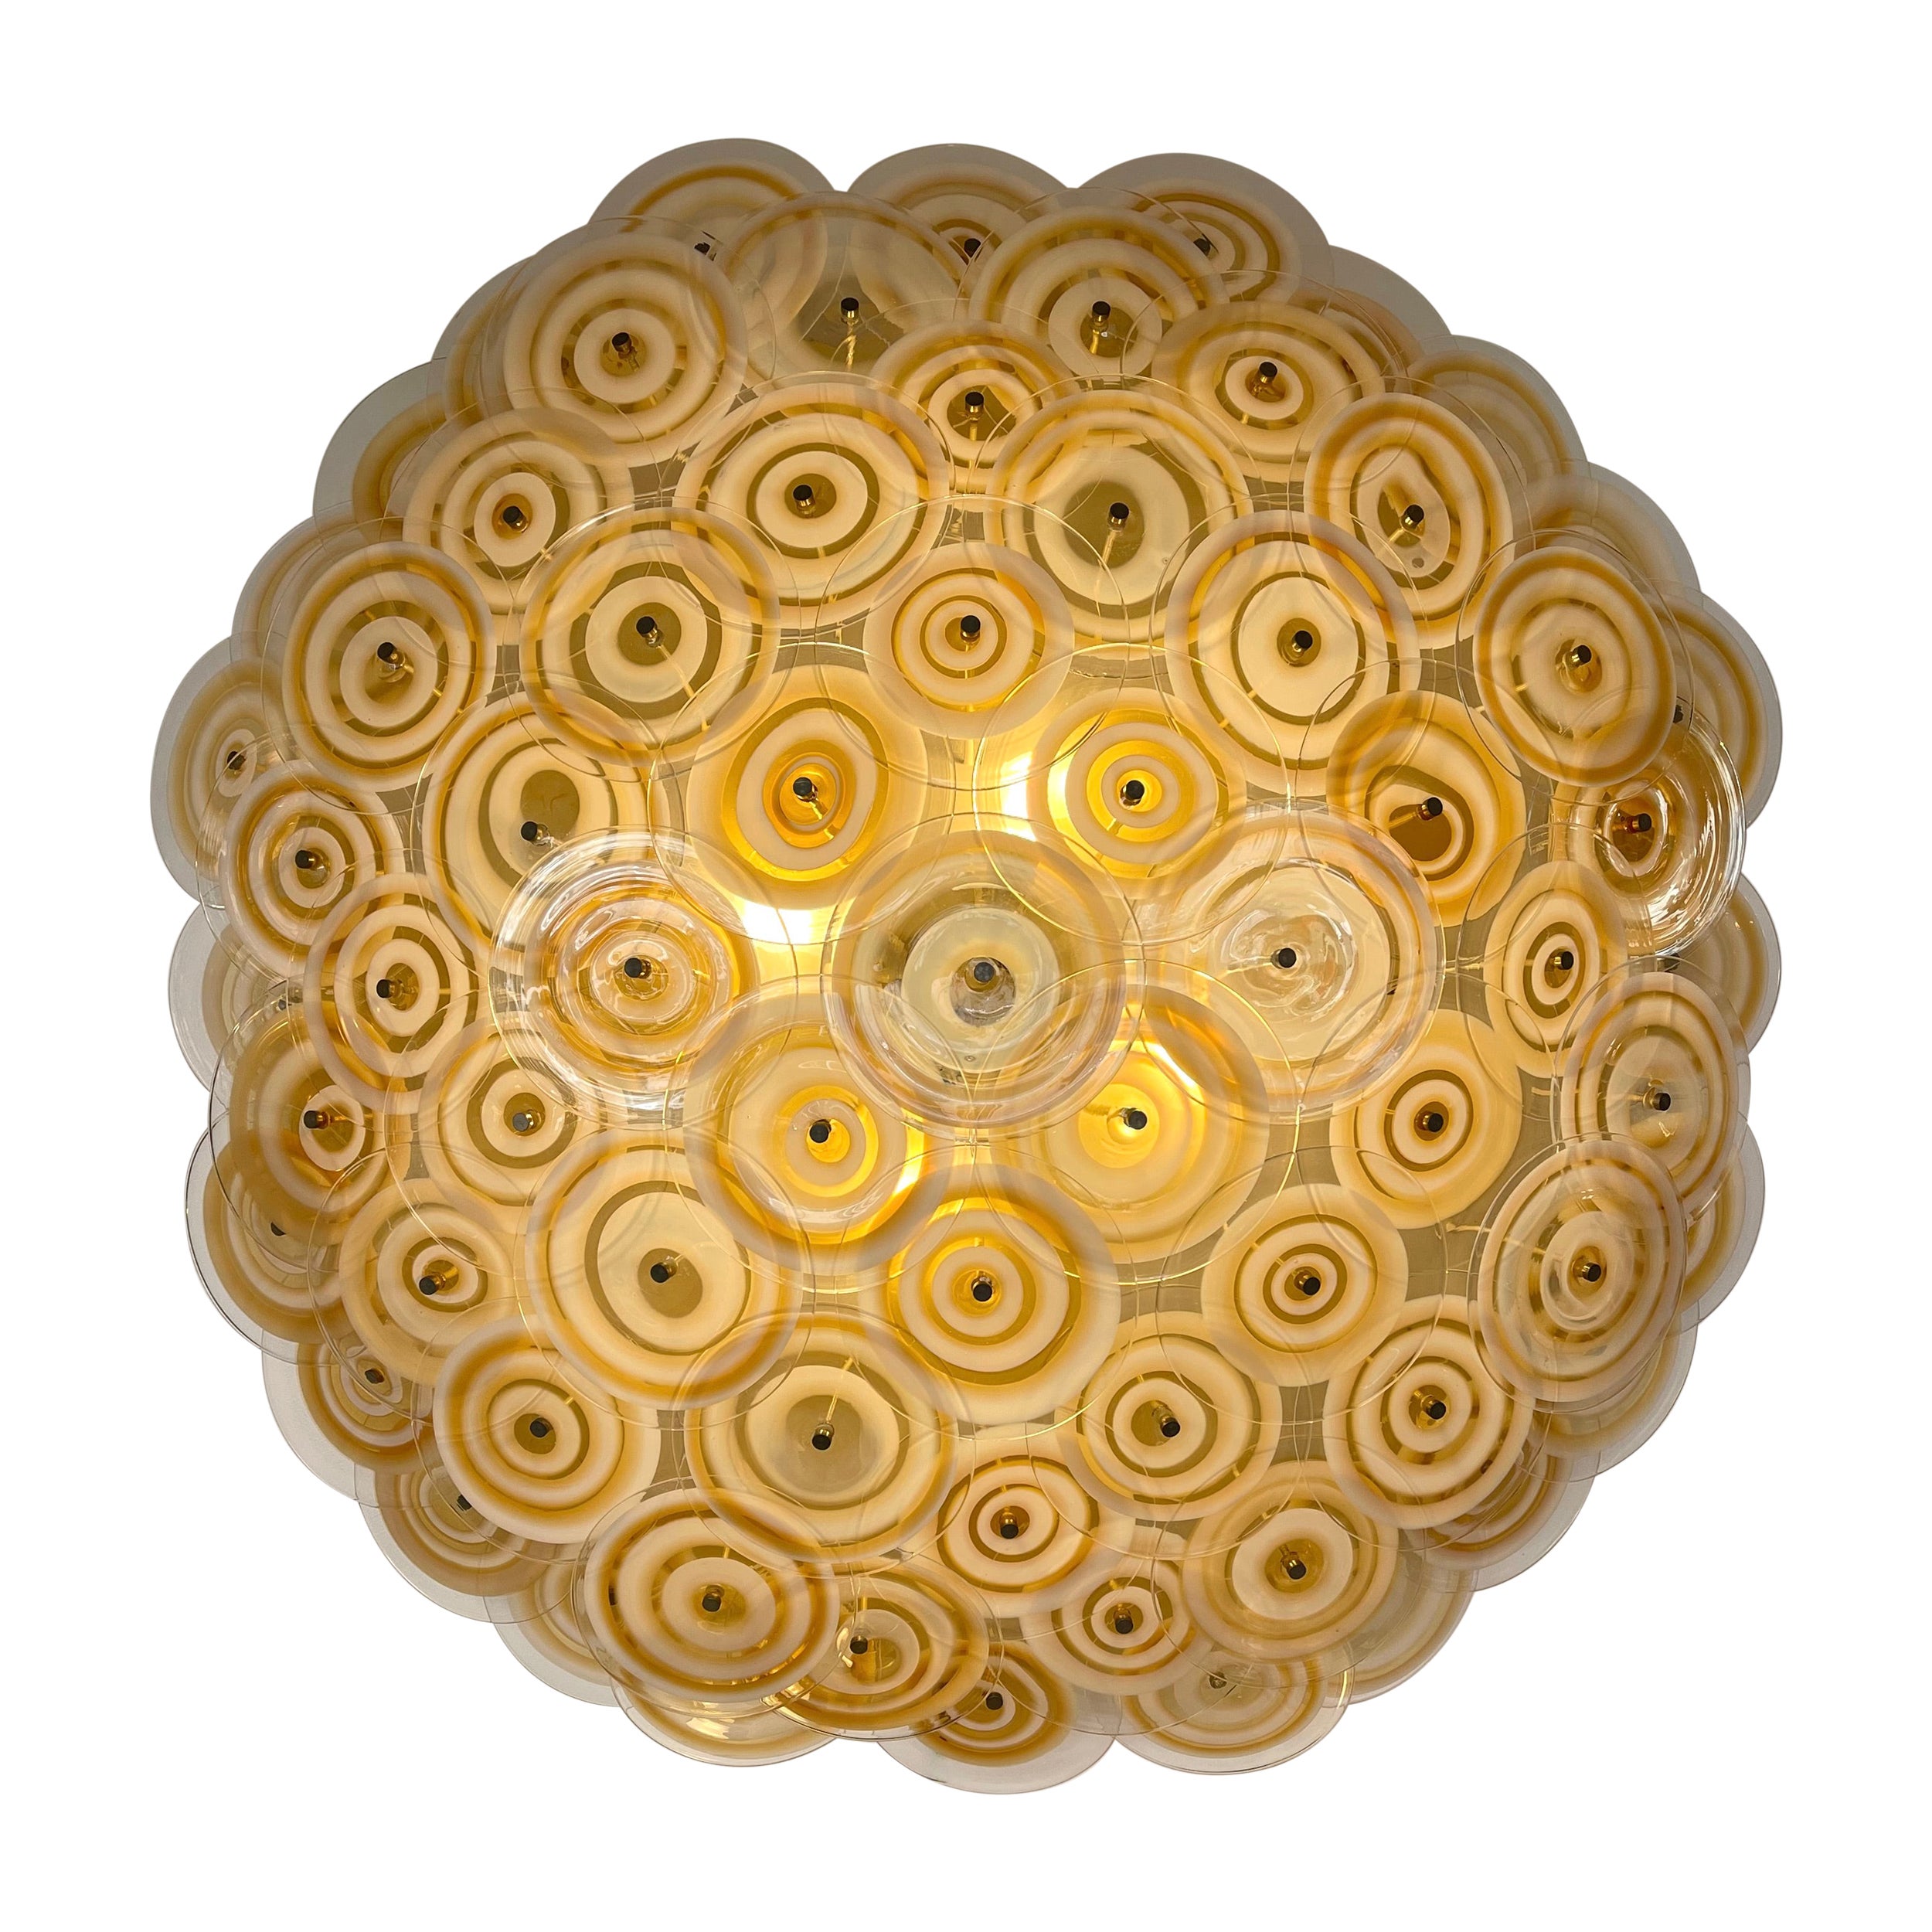 Large Sconce Murano Glass Disc by Gianmaria Potenza for La Murrina. Italy, 1970s